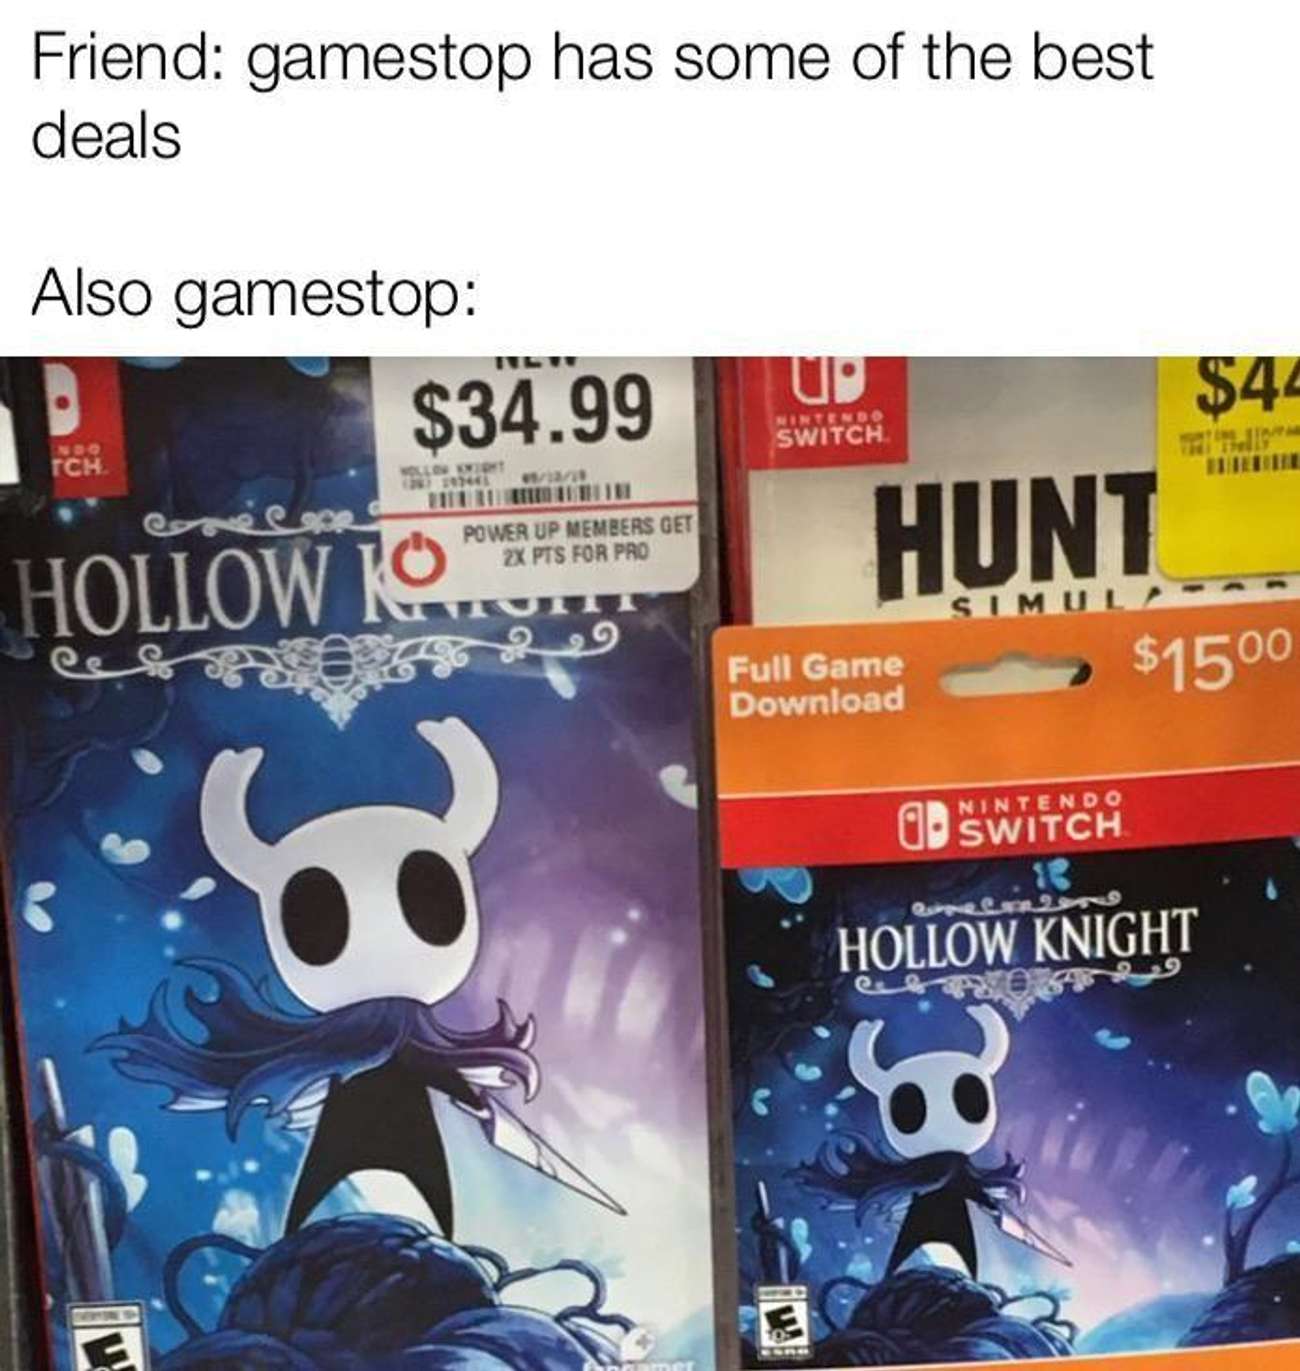 Friend gamestop has some of the best deals Also gamestop Ud $34.99 $44 Nintendo Switch . Ollow Power Up Members Get 2X Pts For Pro Hollow To Hunt $1500 Simul Full Game Download Nintendo Switch 60 Hollow Knight 60